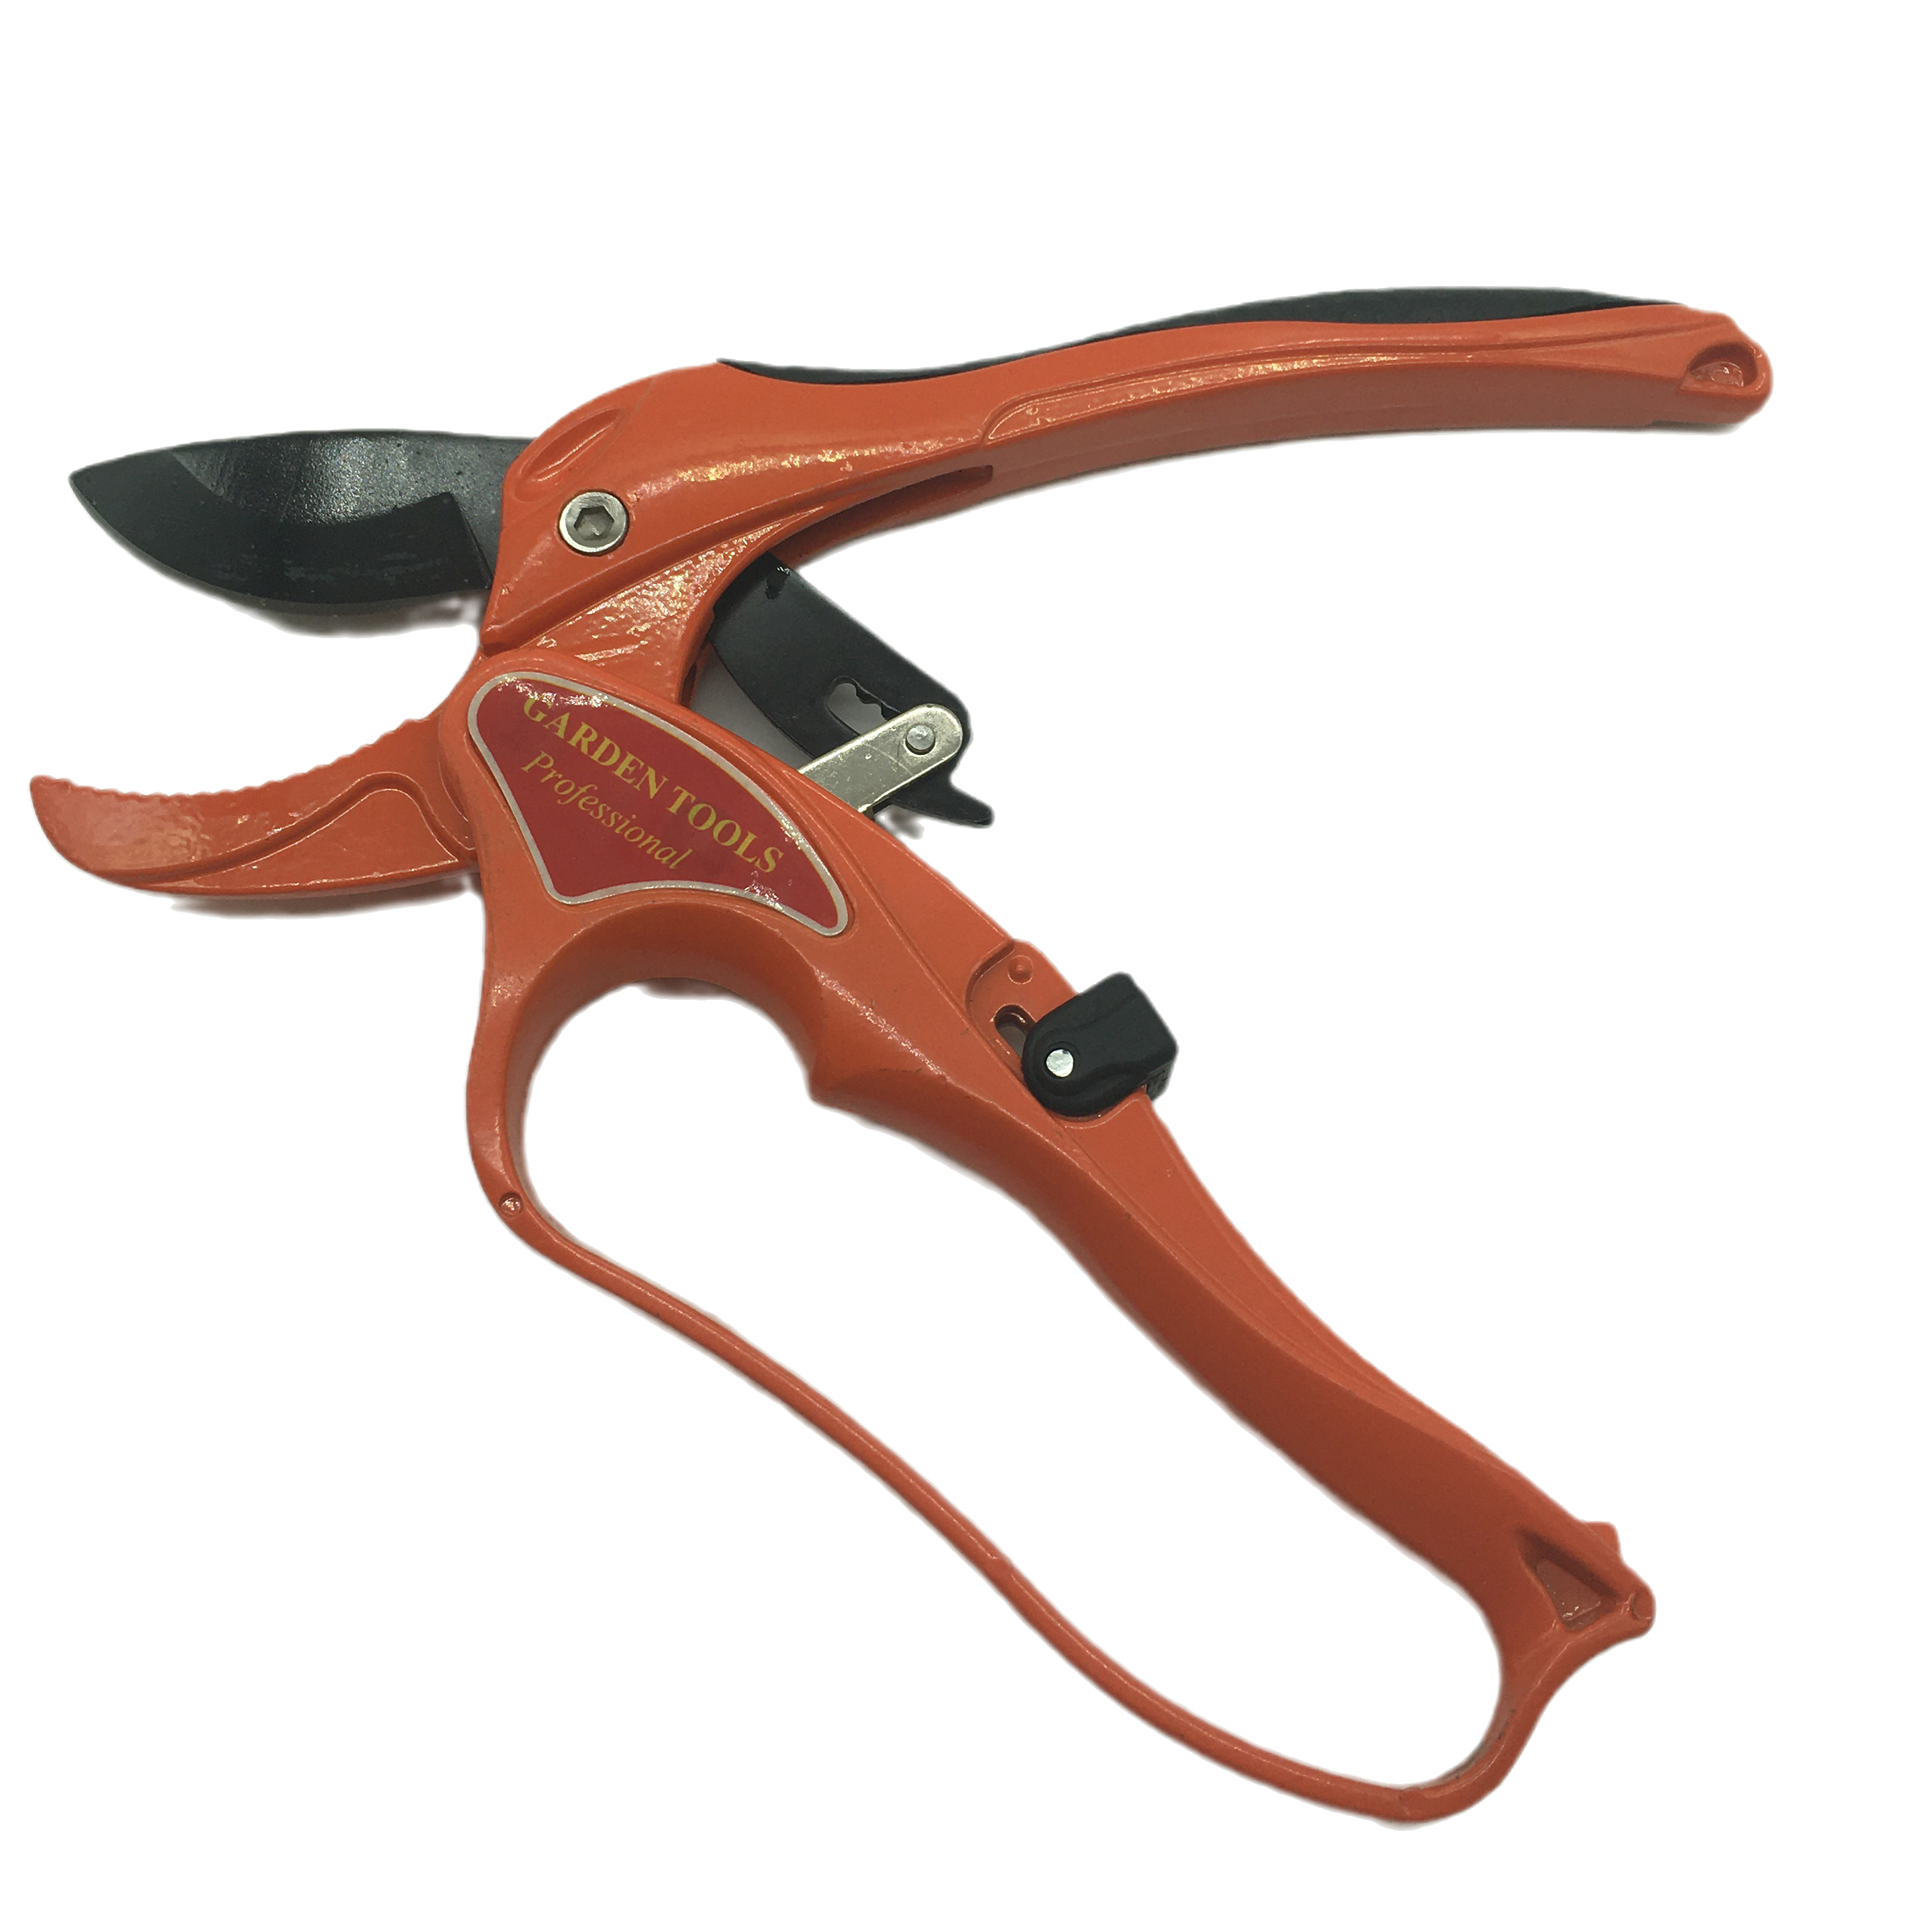 Garden Shears SK5 Blades Red-orange Garden Tools Labor-saving Tree Branches And Flower Branches High-carbon Steel Shears